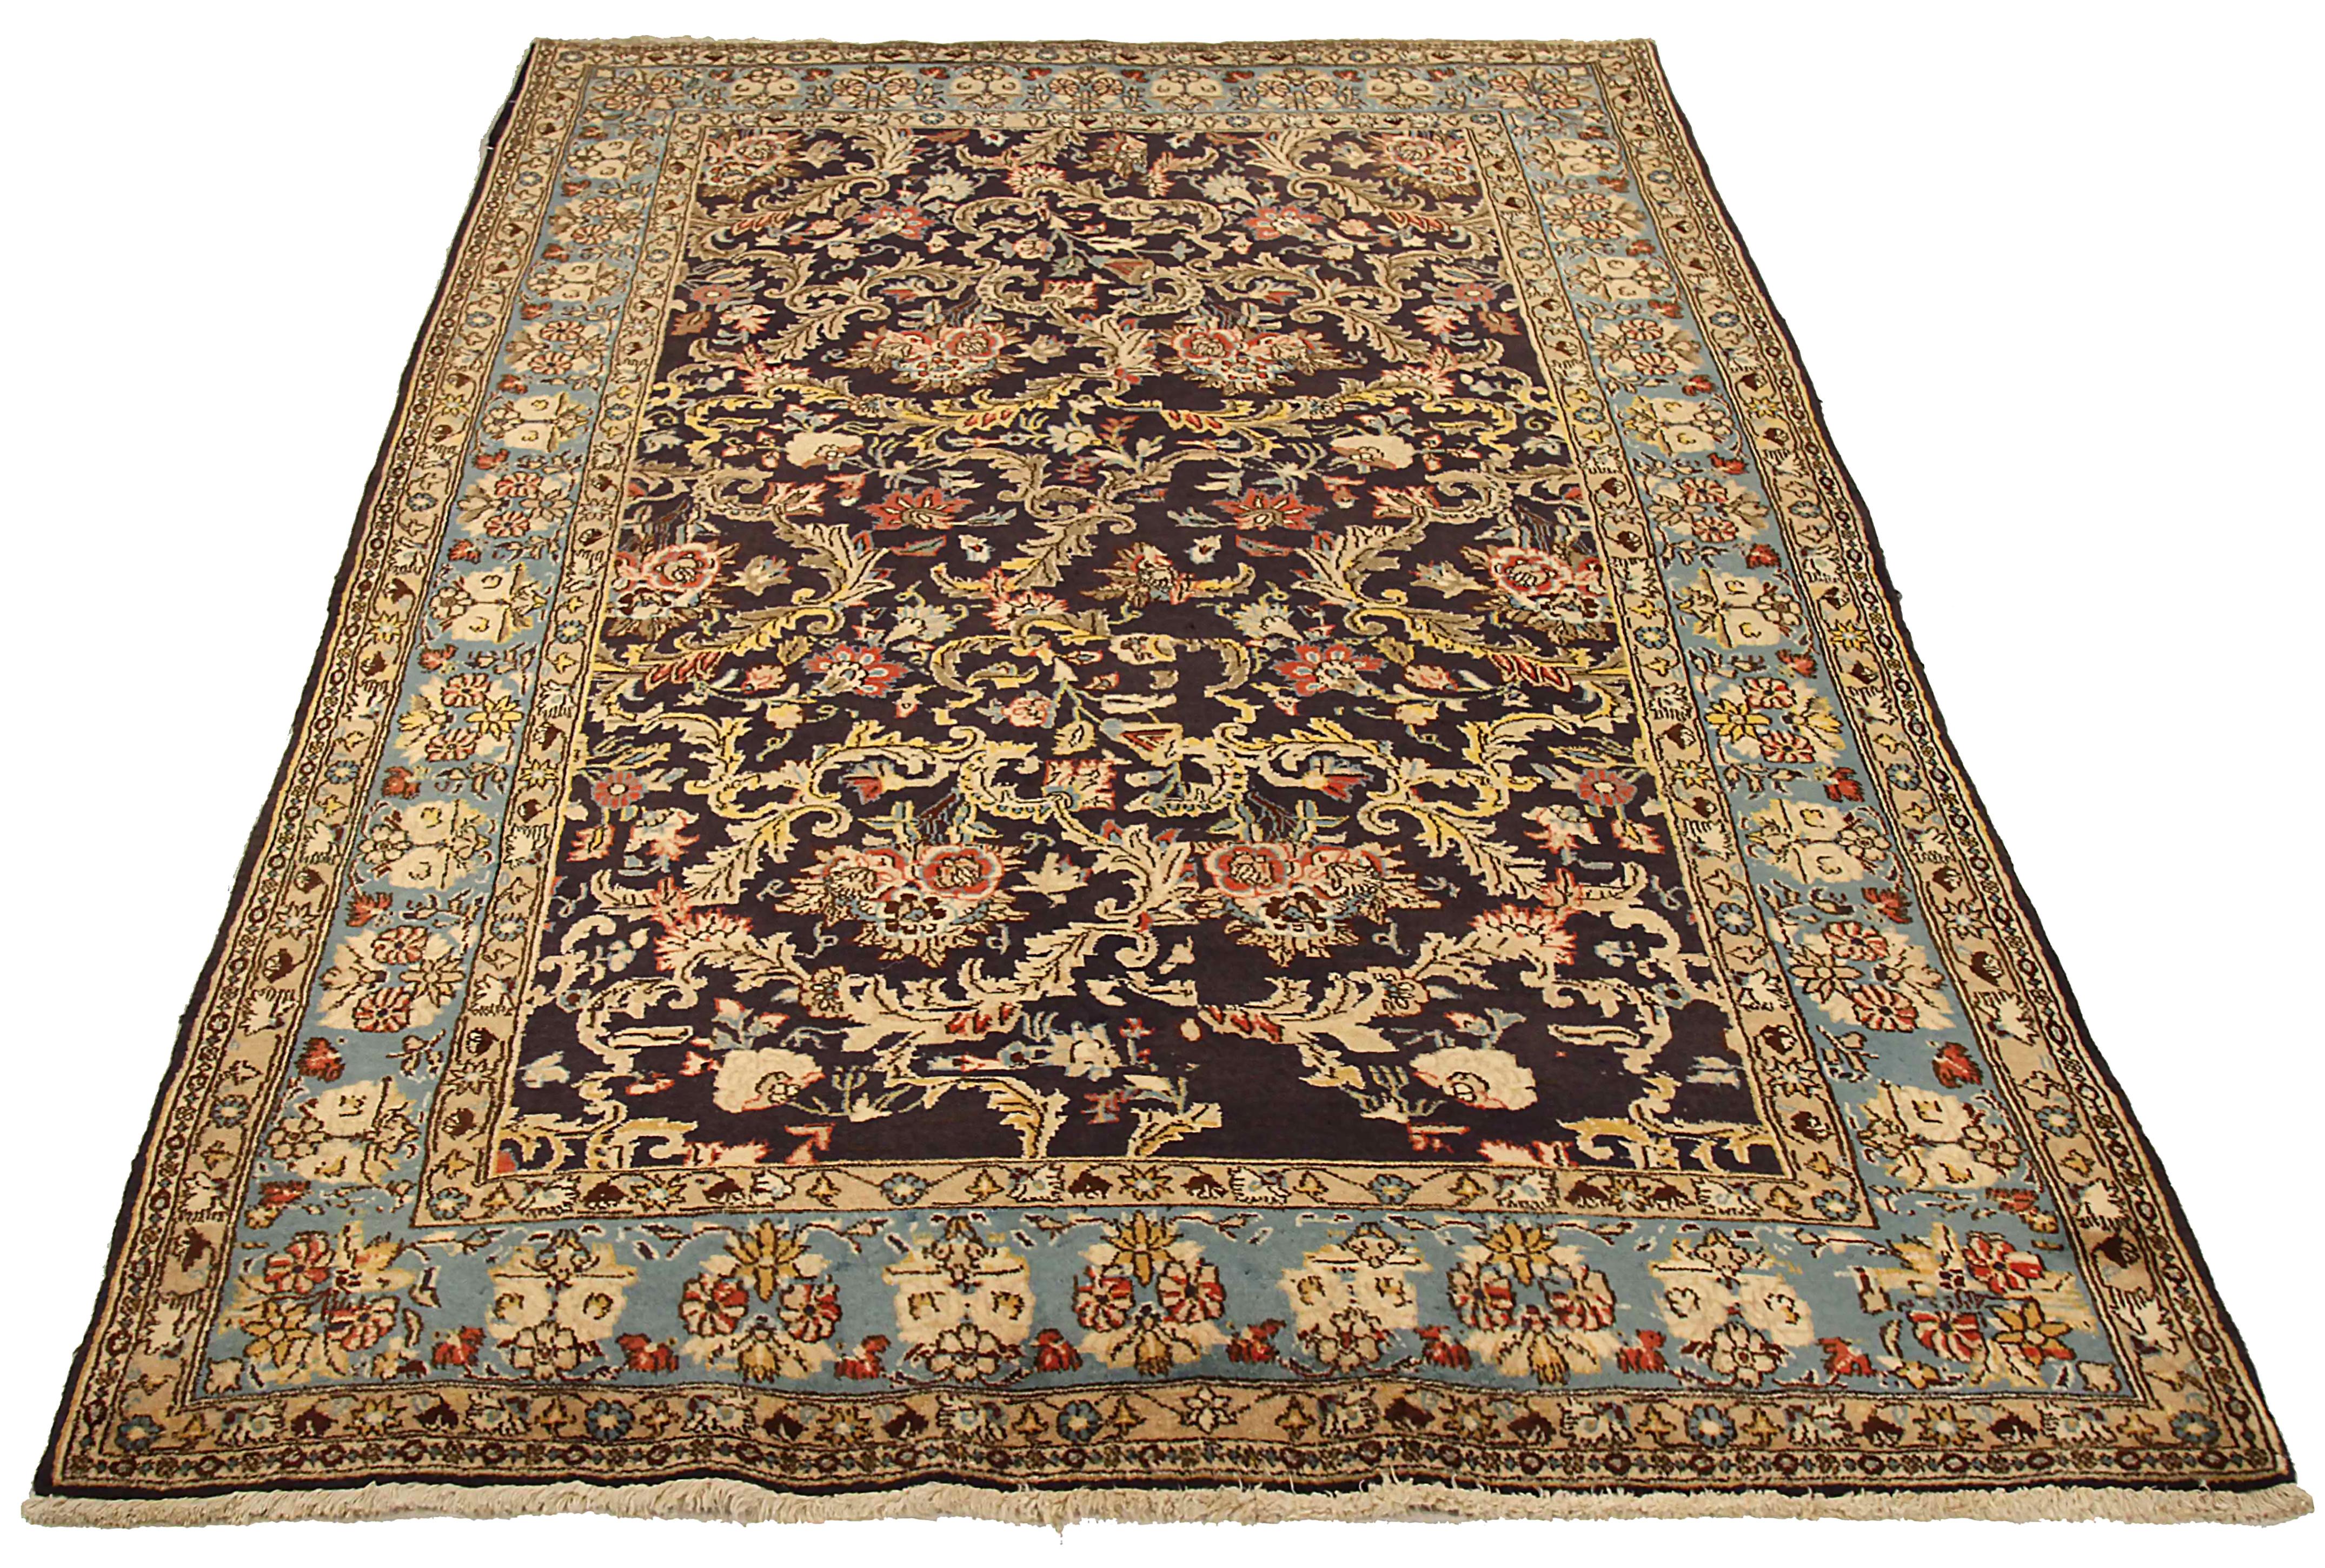 Antique Persian area rug handwoven from the finest sheep’s wool. It’s colored with all-natural vegetable dyes that are safe for humans and pets. It’s a traditional Qom design handwoven by expert artisans. It’s a lovely area rug that can be